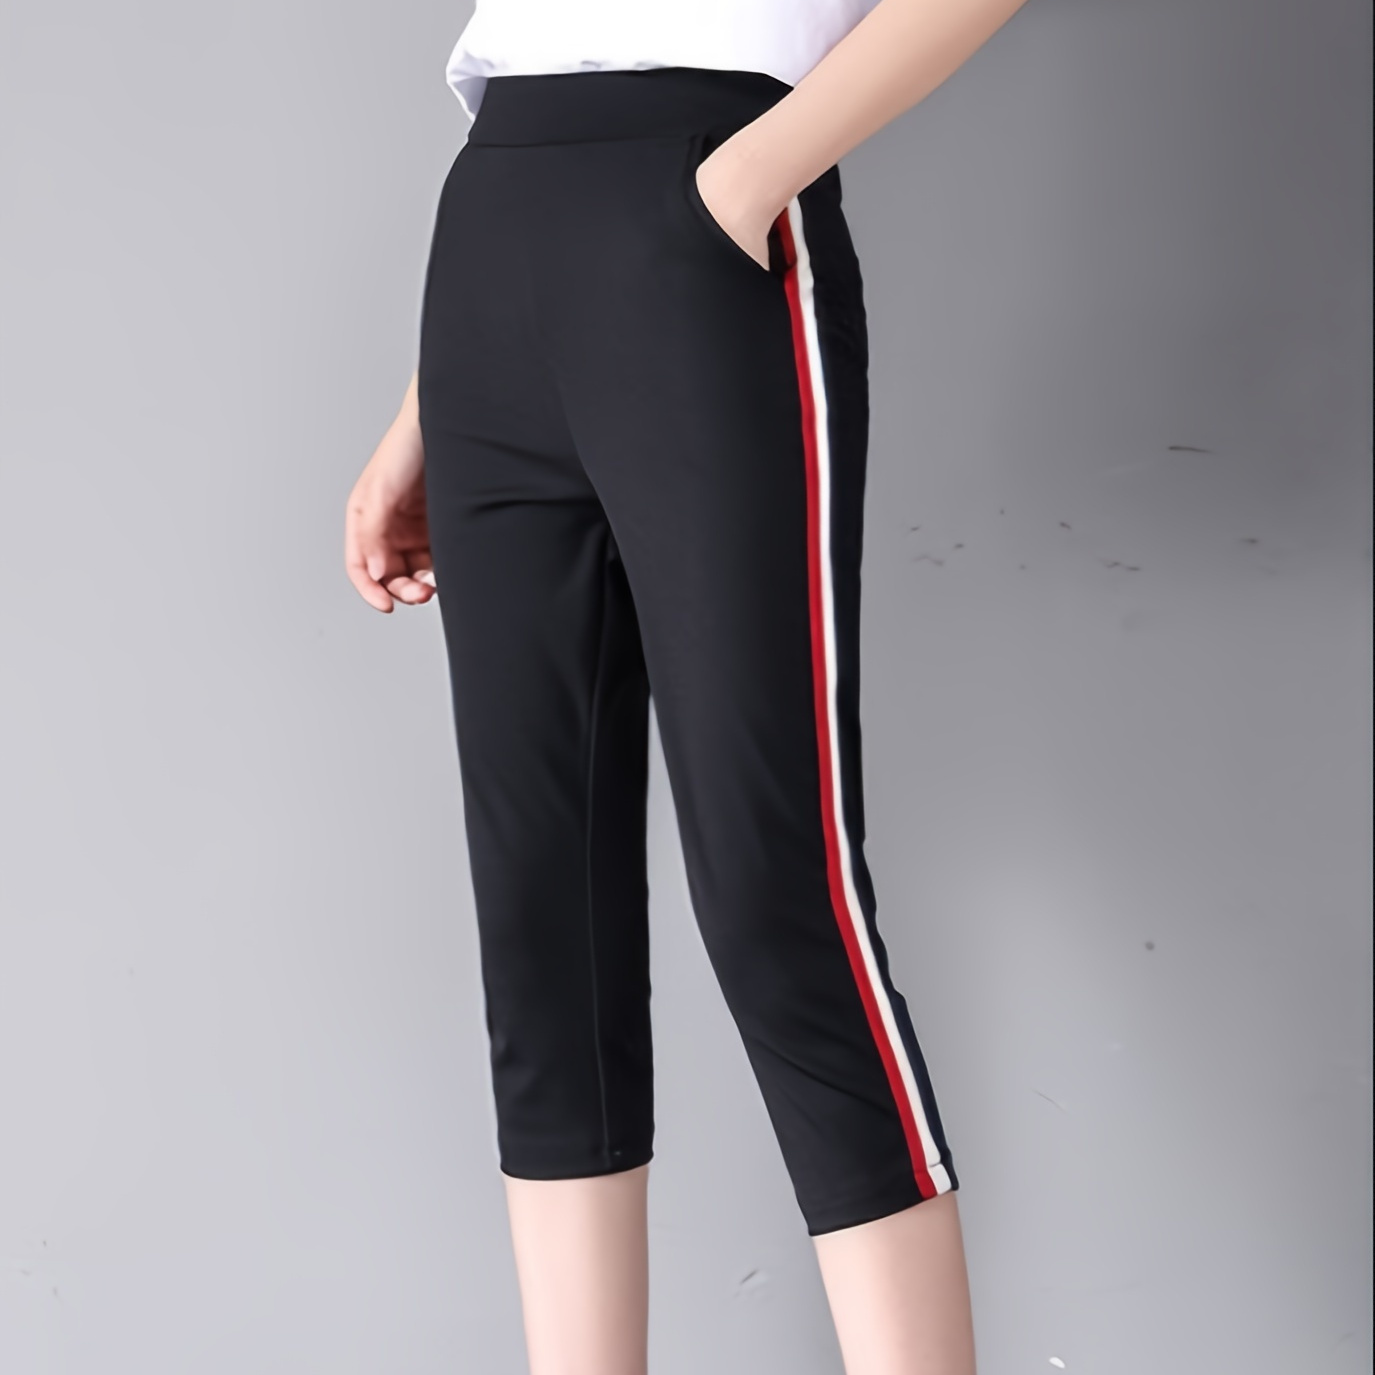 

Women's Capri Leggings, Stretchy High Waist Skinny Pants, Comfortable Yoga Trousers With Colorful Side Stripe, Sports Style